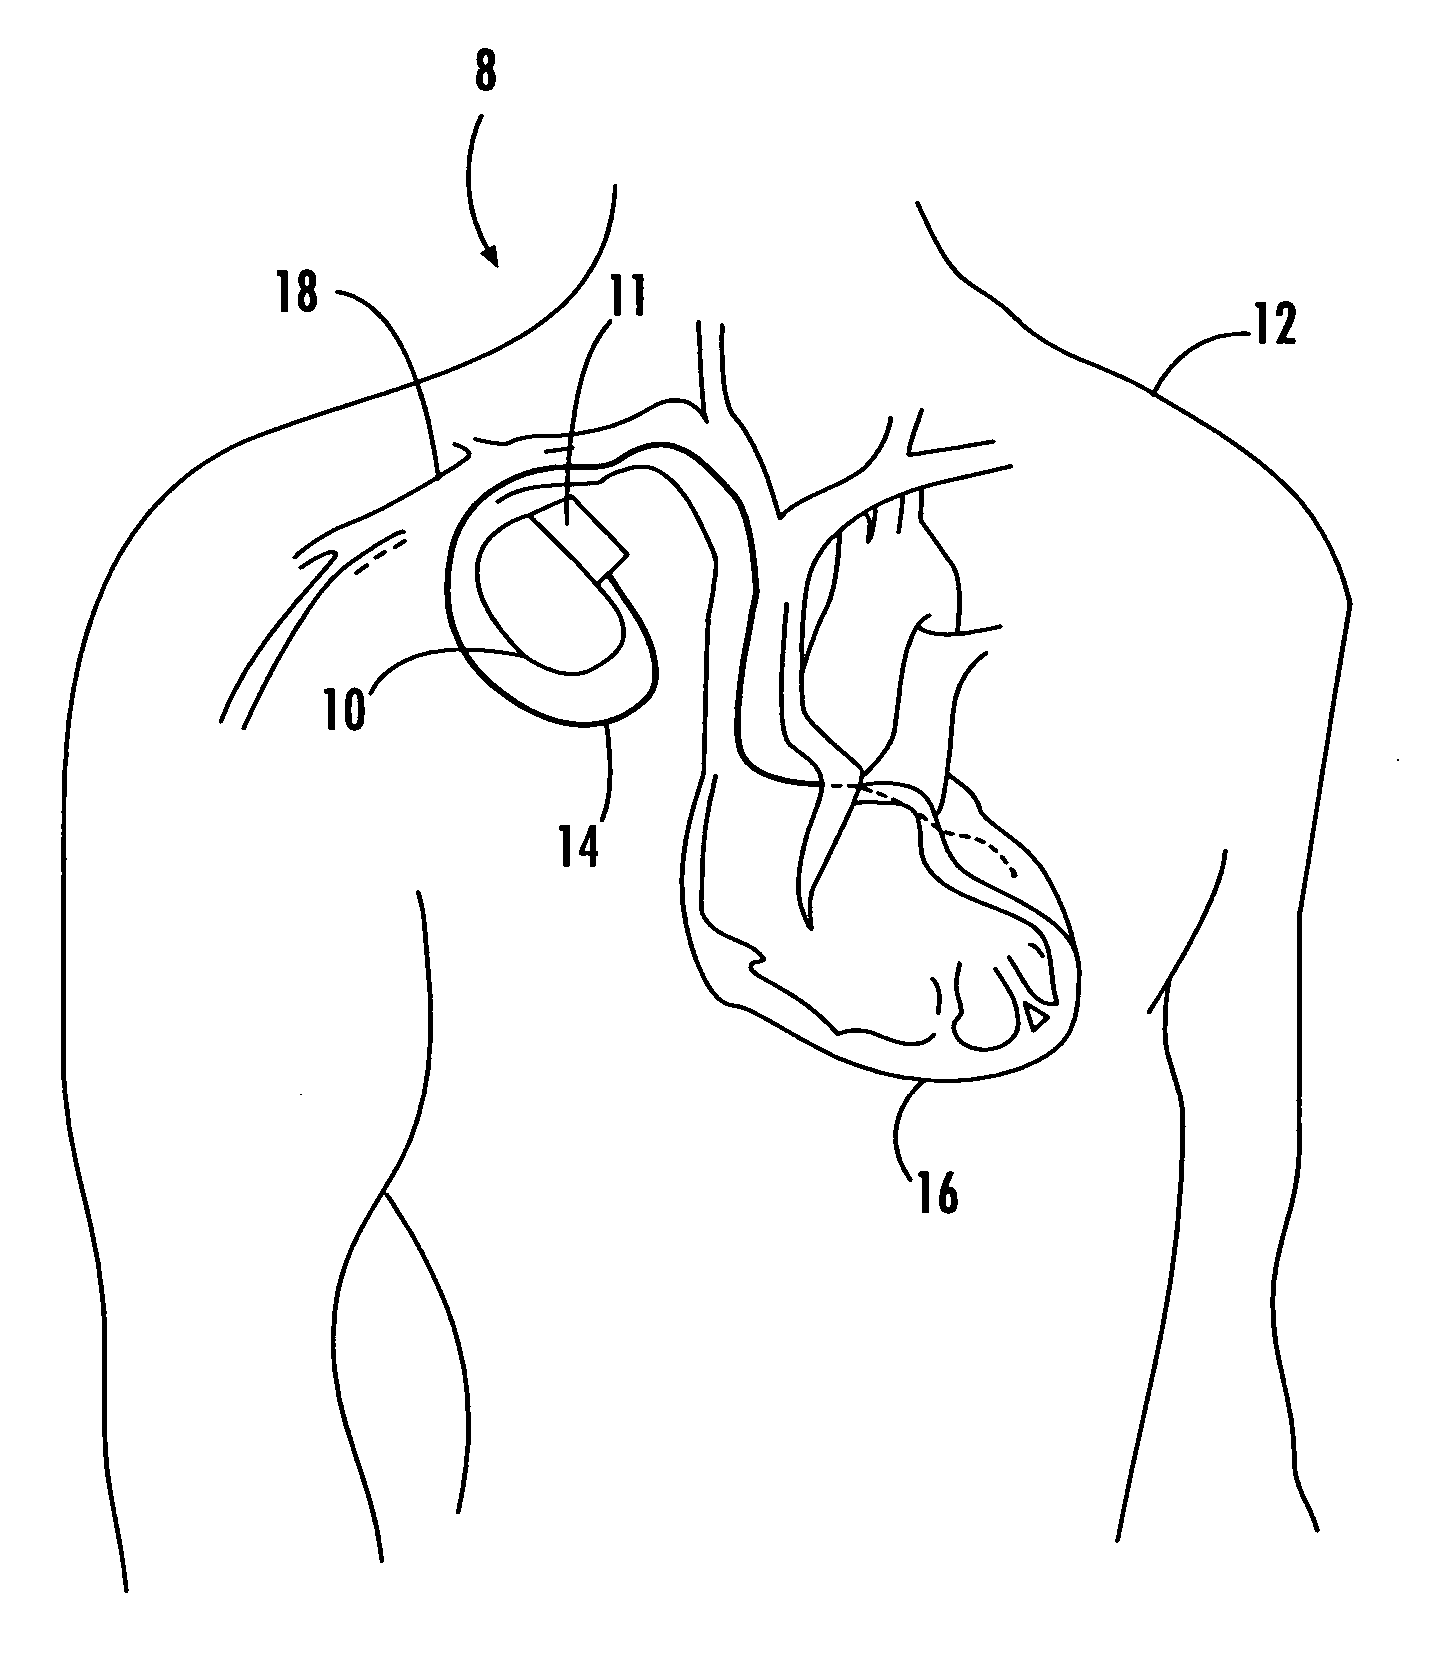 Method and apparatus for reliably placing and adjusting a left ventricular pacemaker lead